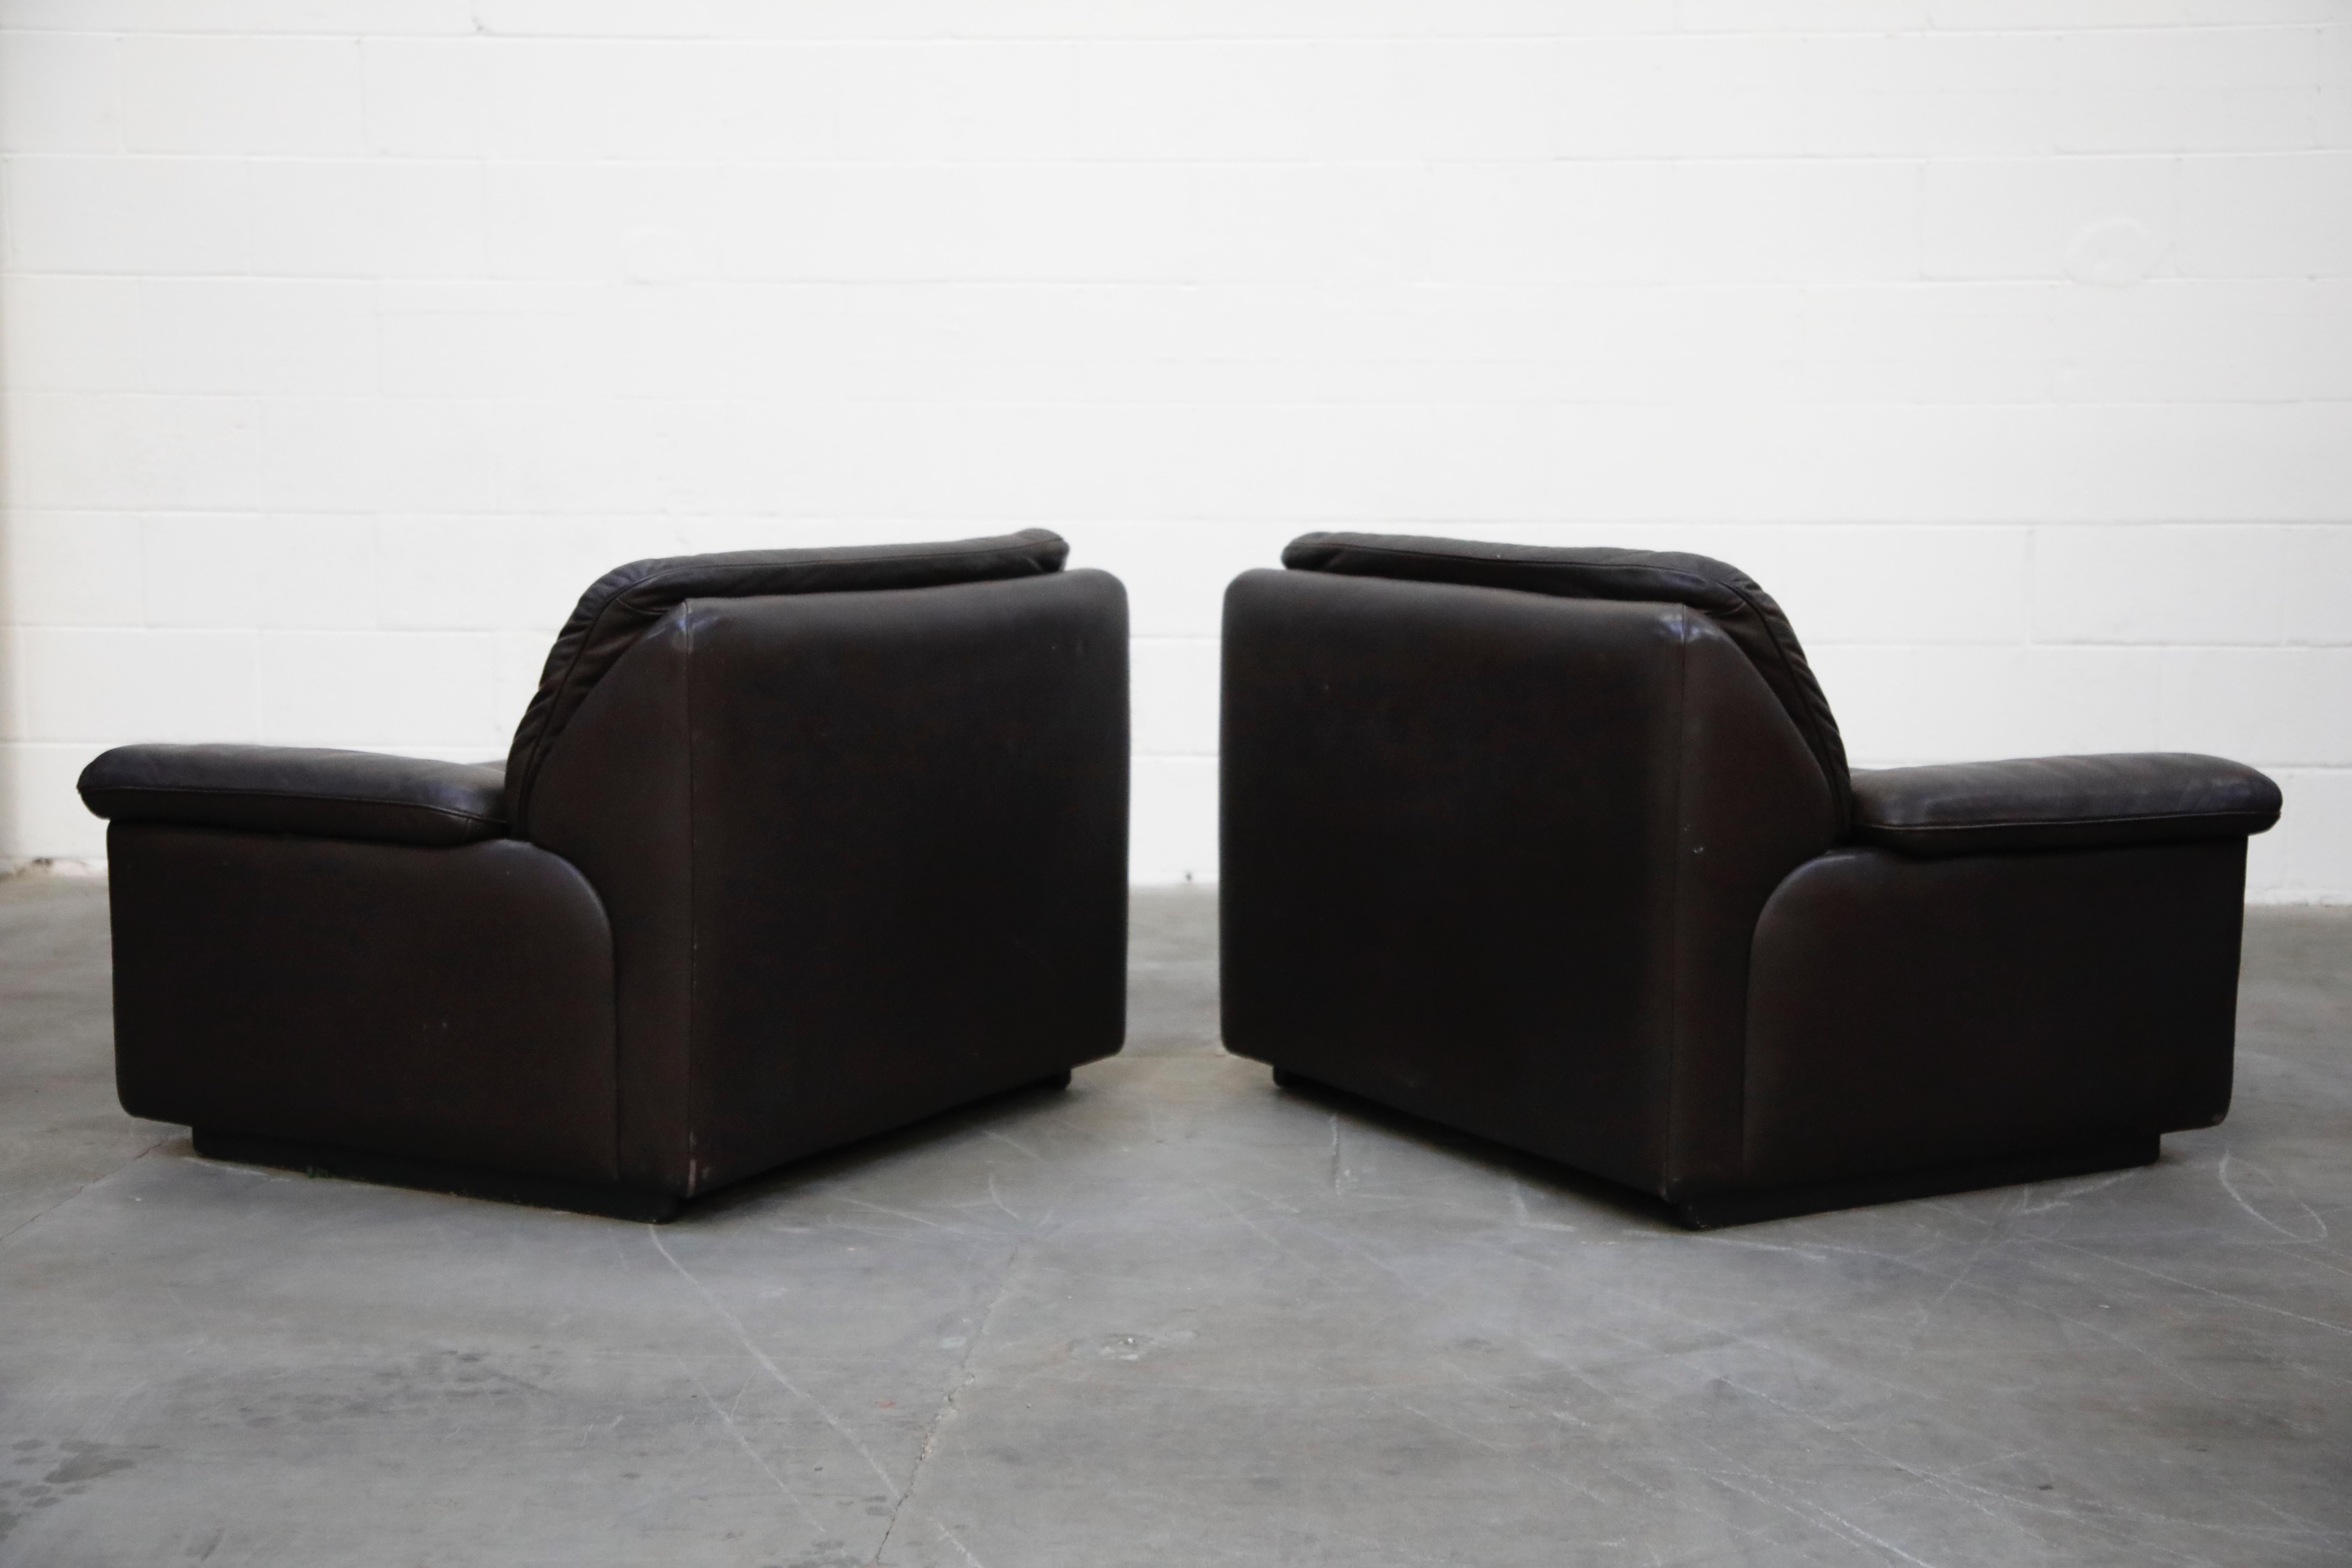 Pair of Leather Lounge Armchairs by De Sede, Switzerland, 1960s, Signed 1